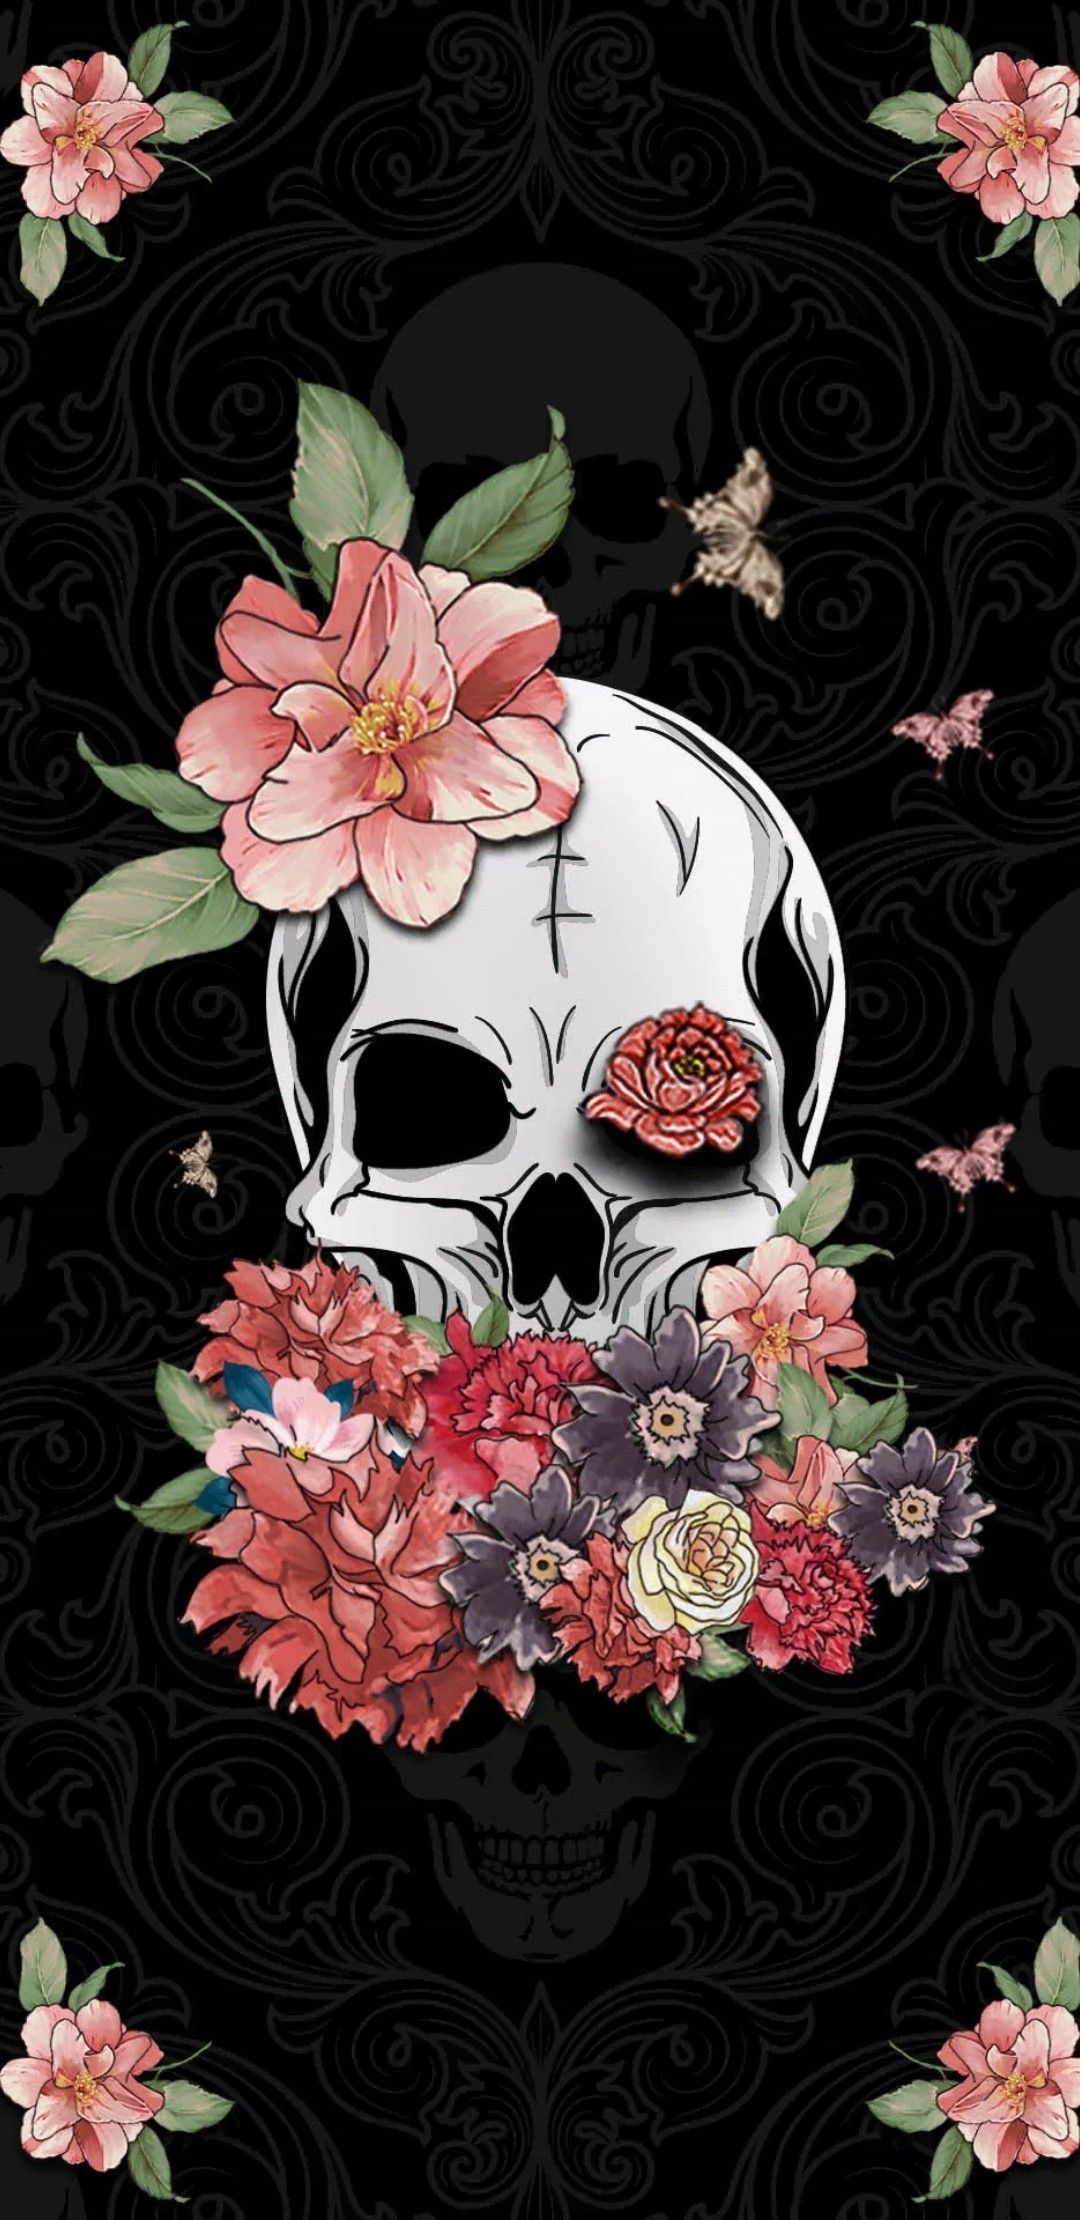 A skull with flowers on it - Skull